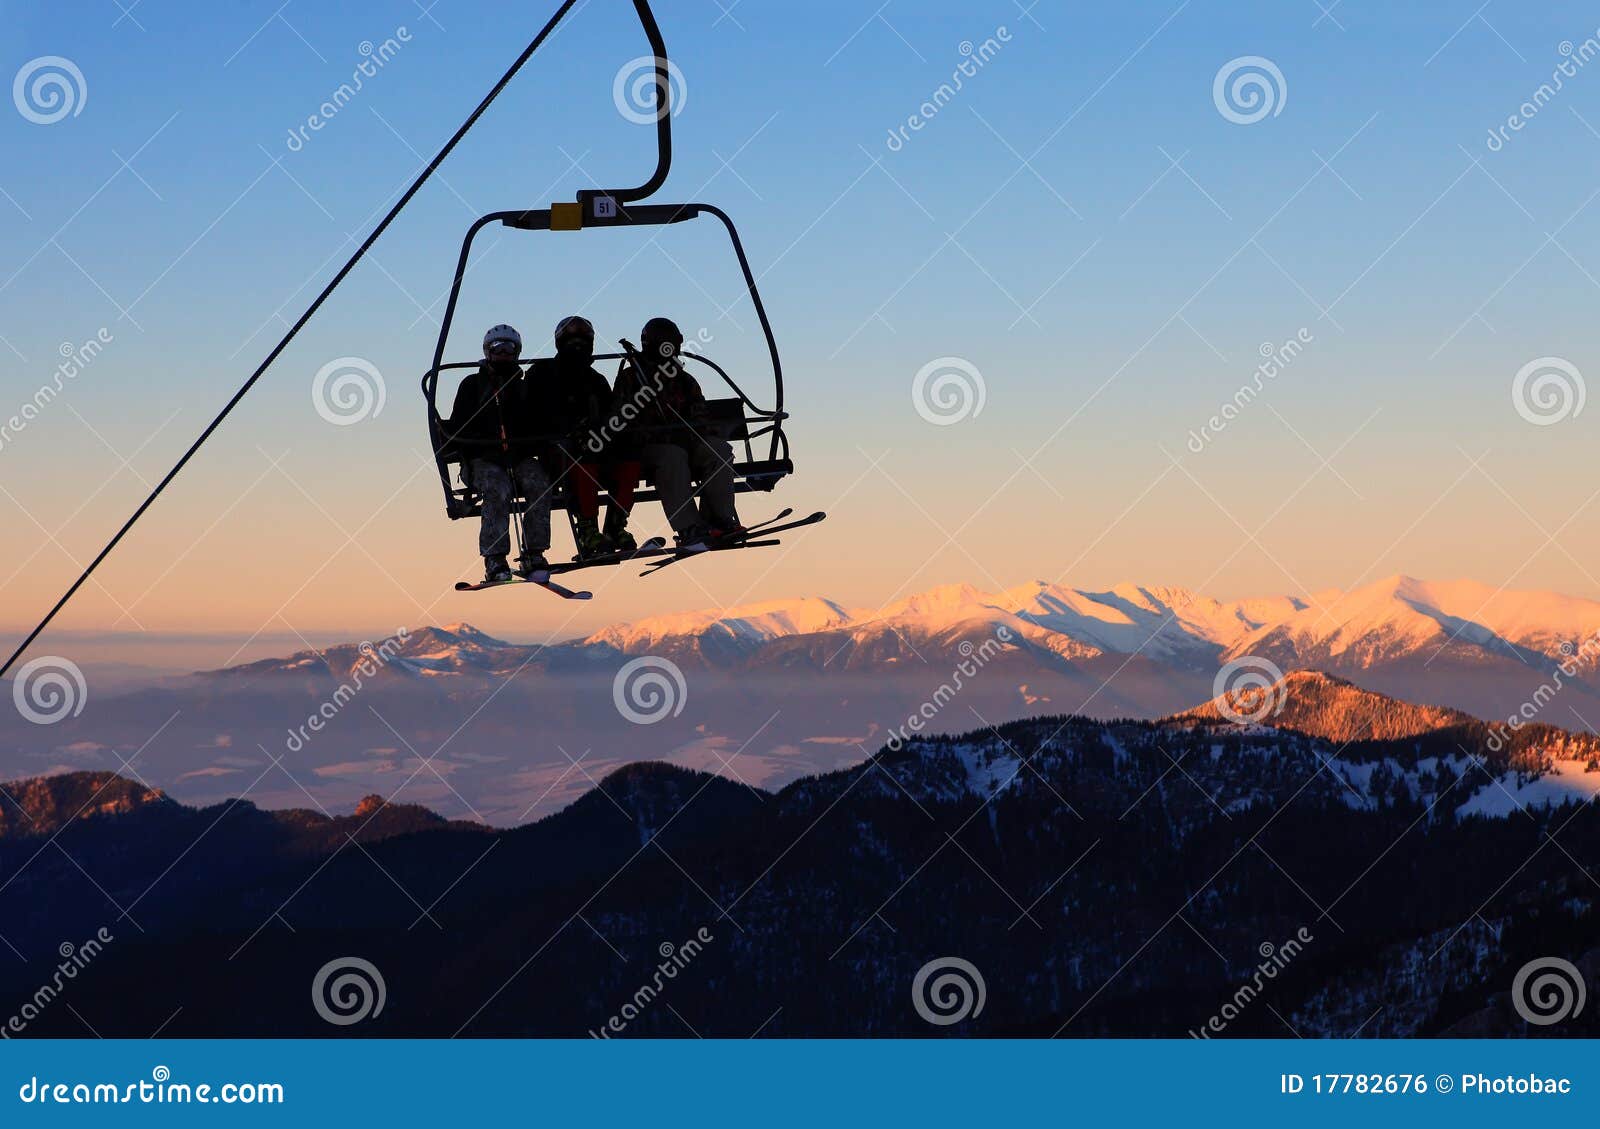 chair ski lift with skiers